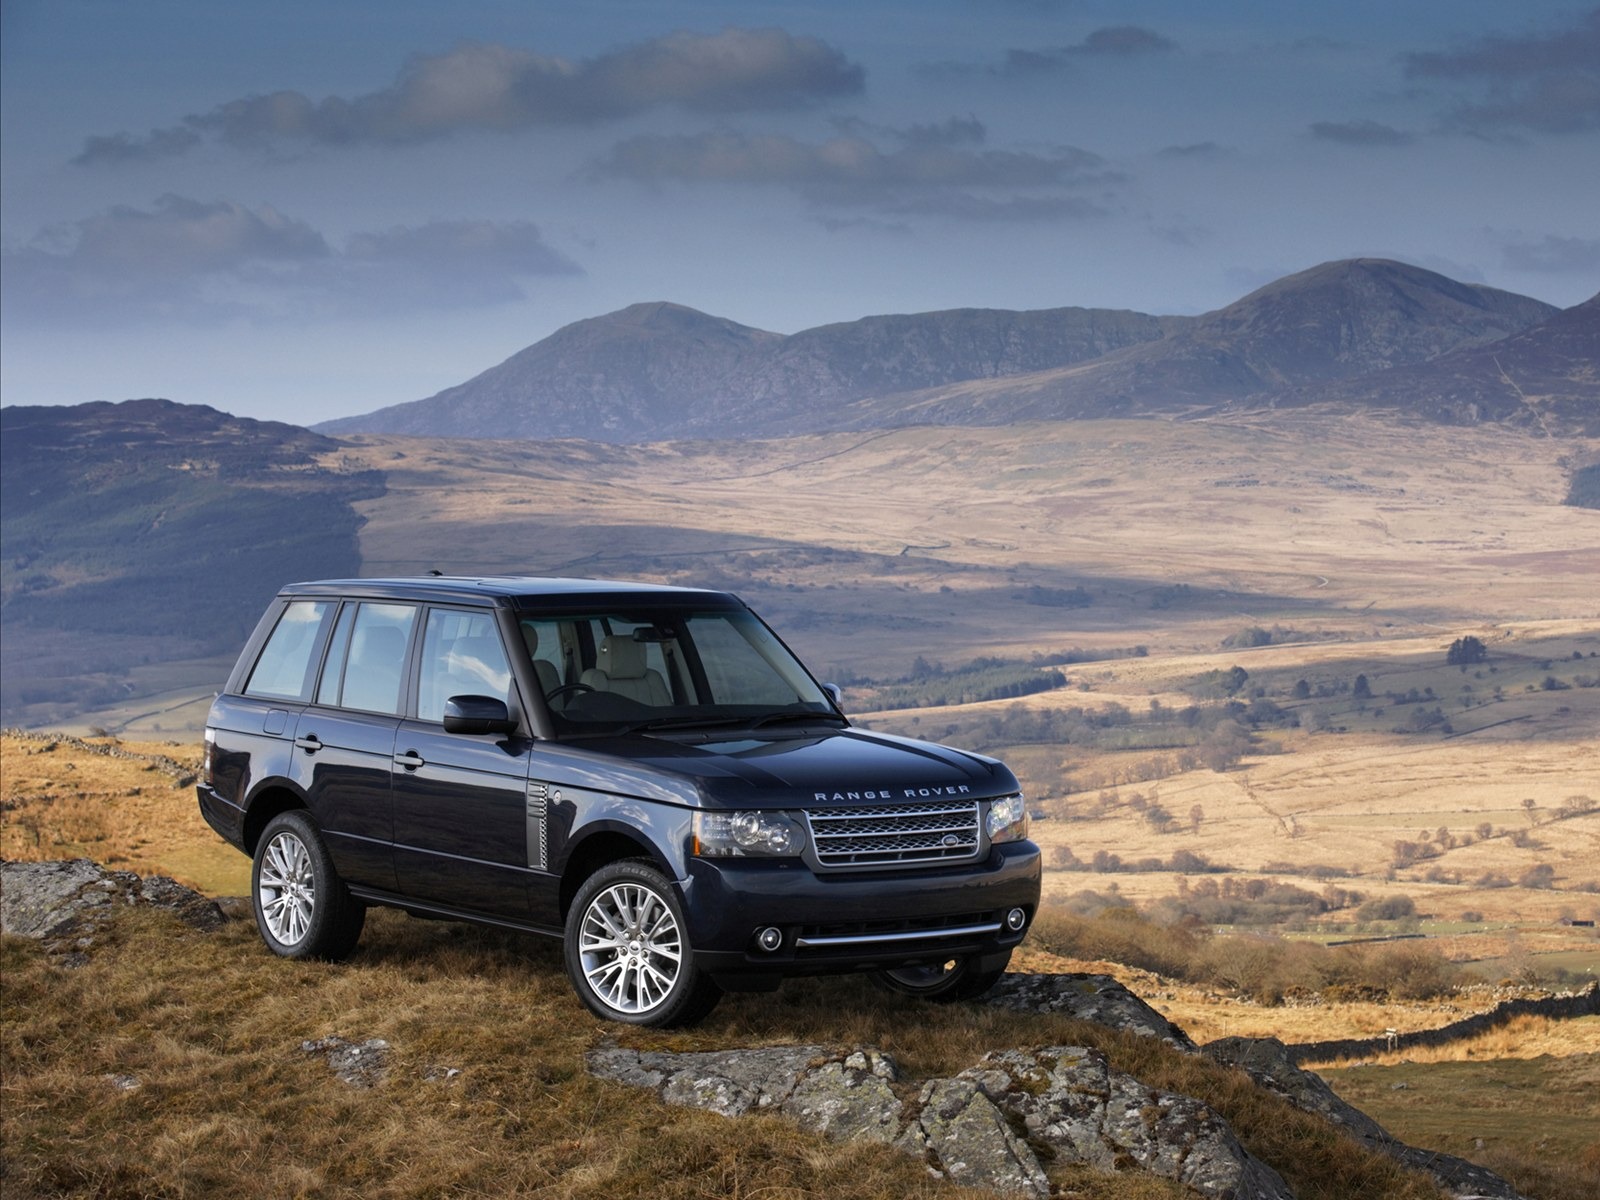 Land Rover wallpapers 2011 (2) #5 - 1600x1200